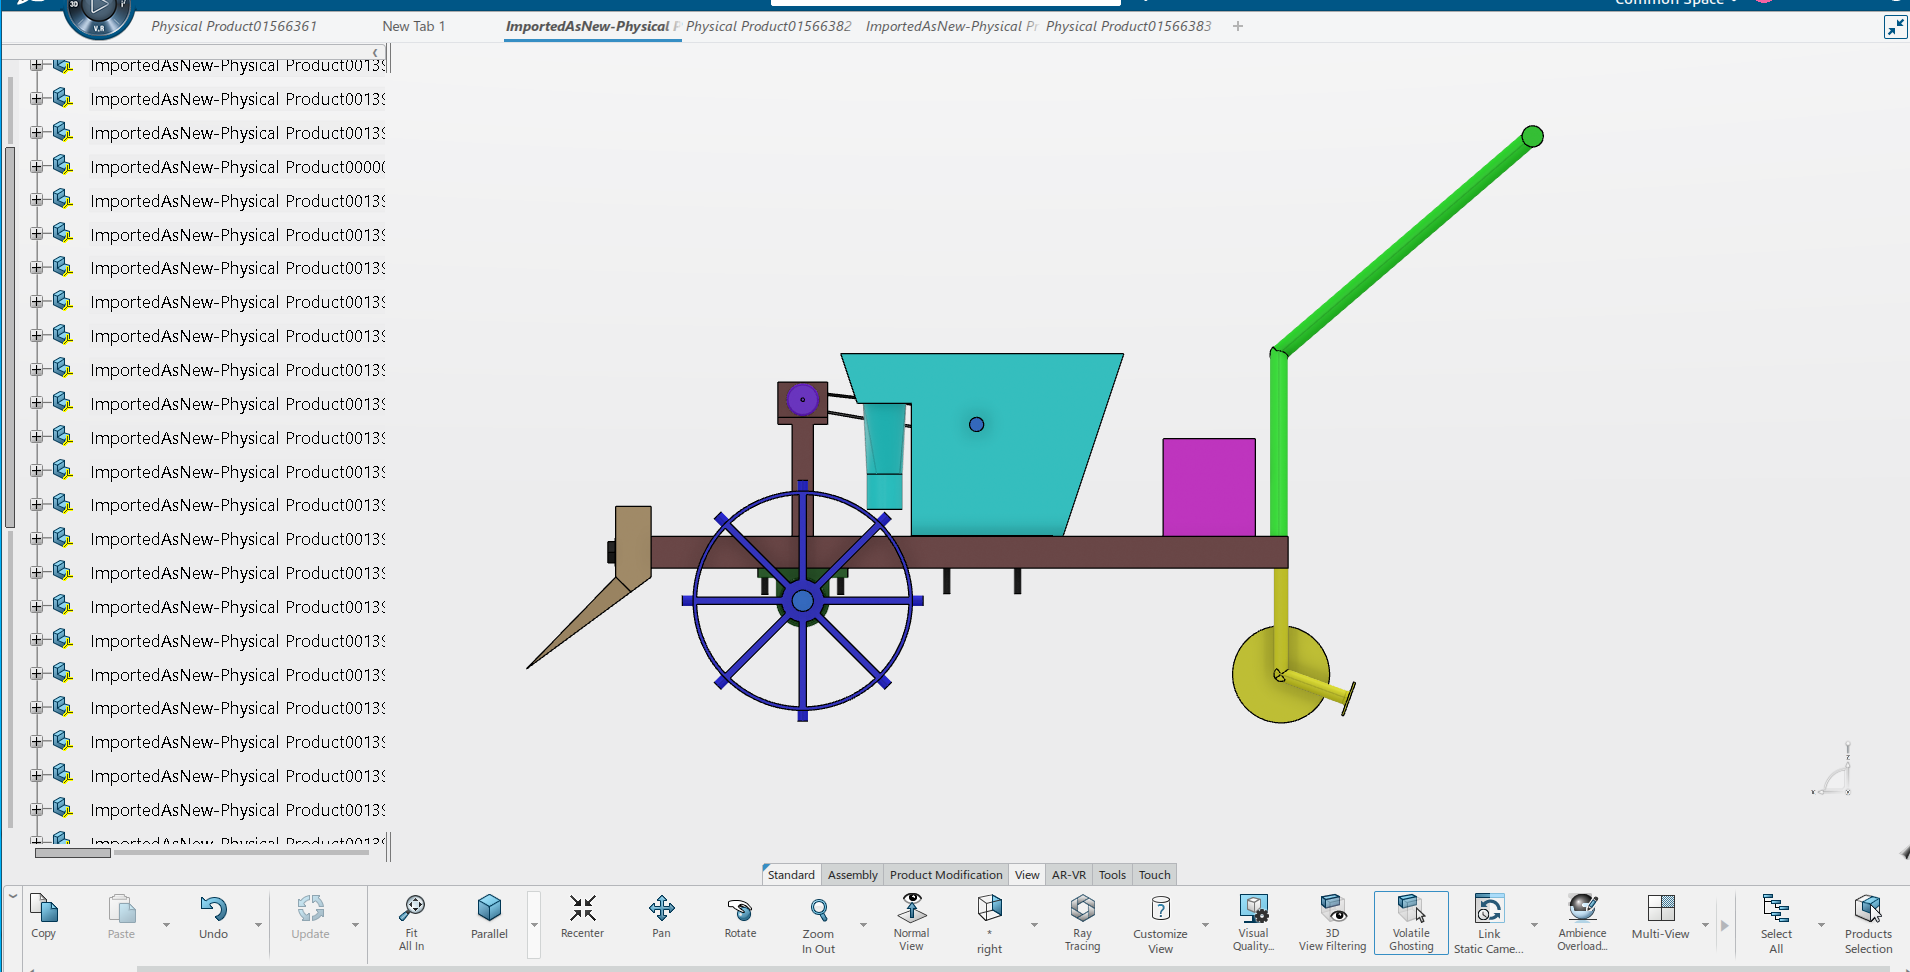 SEED SOWING MACHINE, 3D CAD Model Library